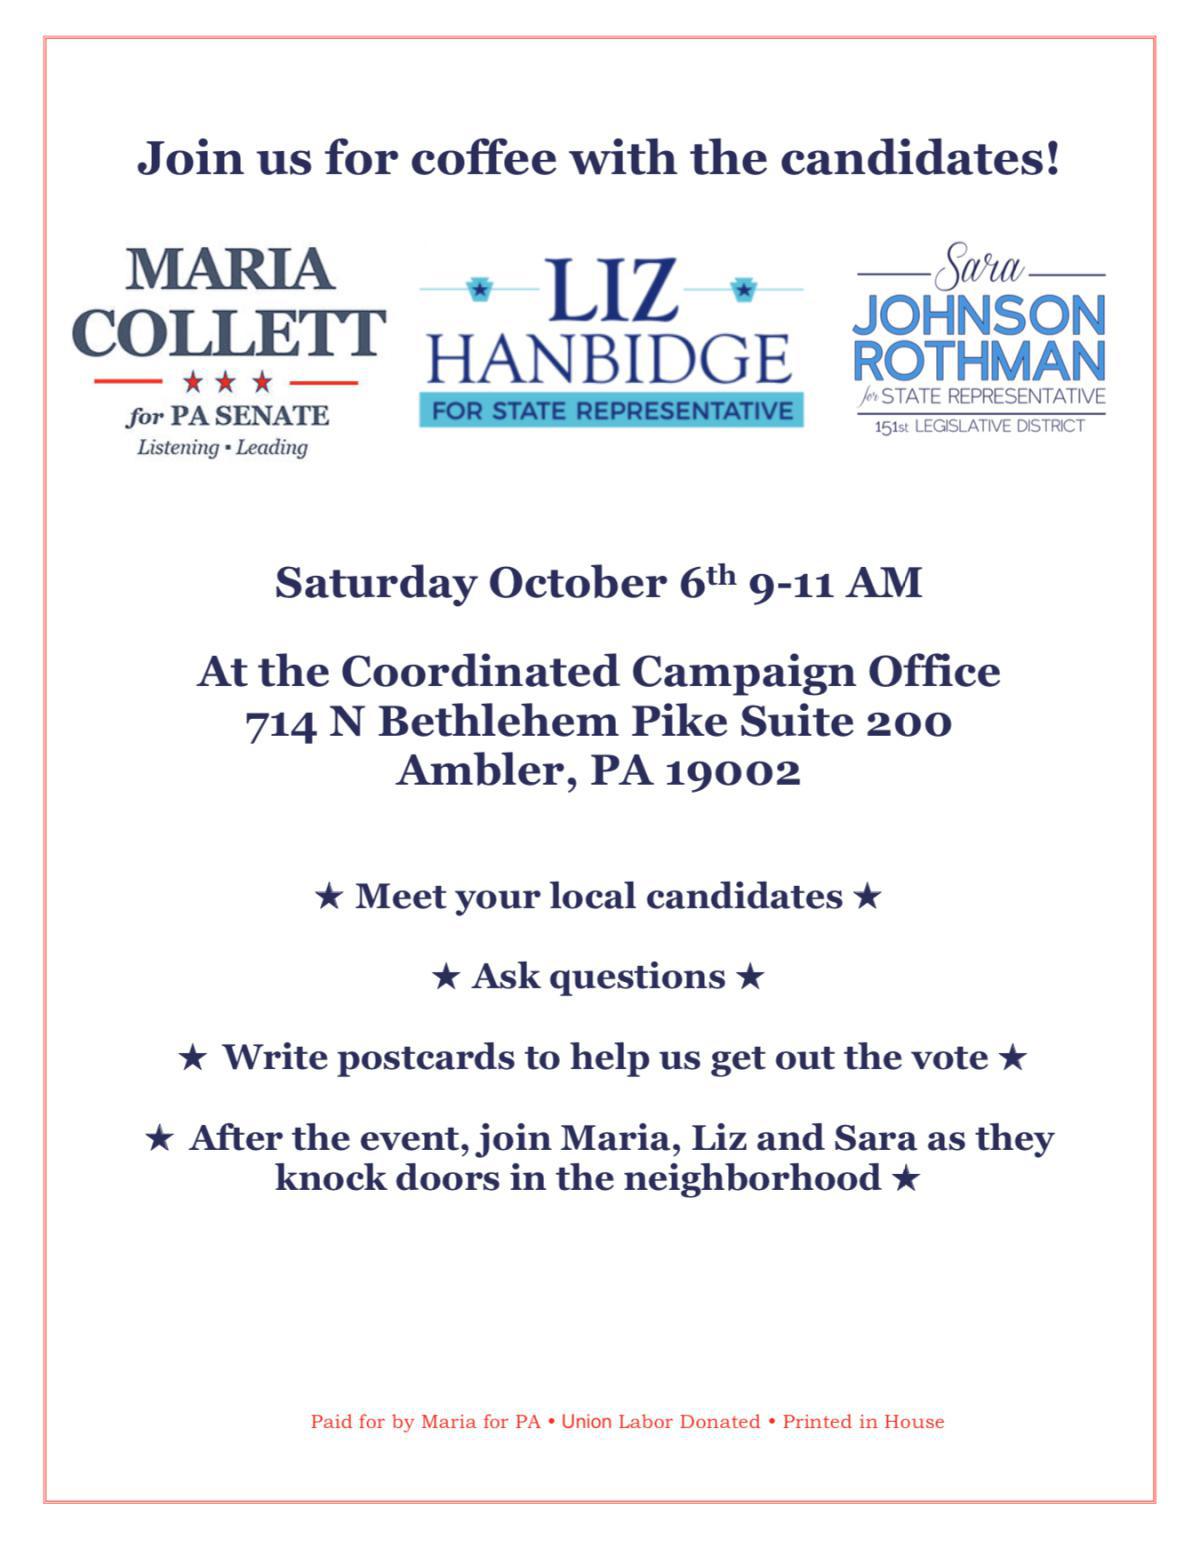 Come On Out For Coffee And Candidates.